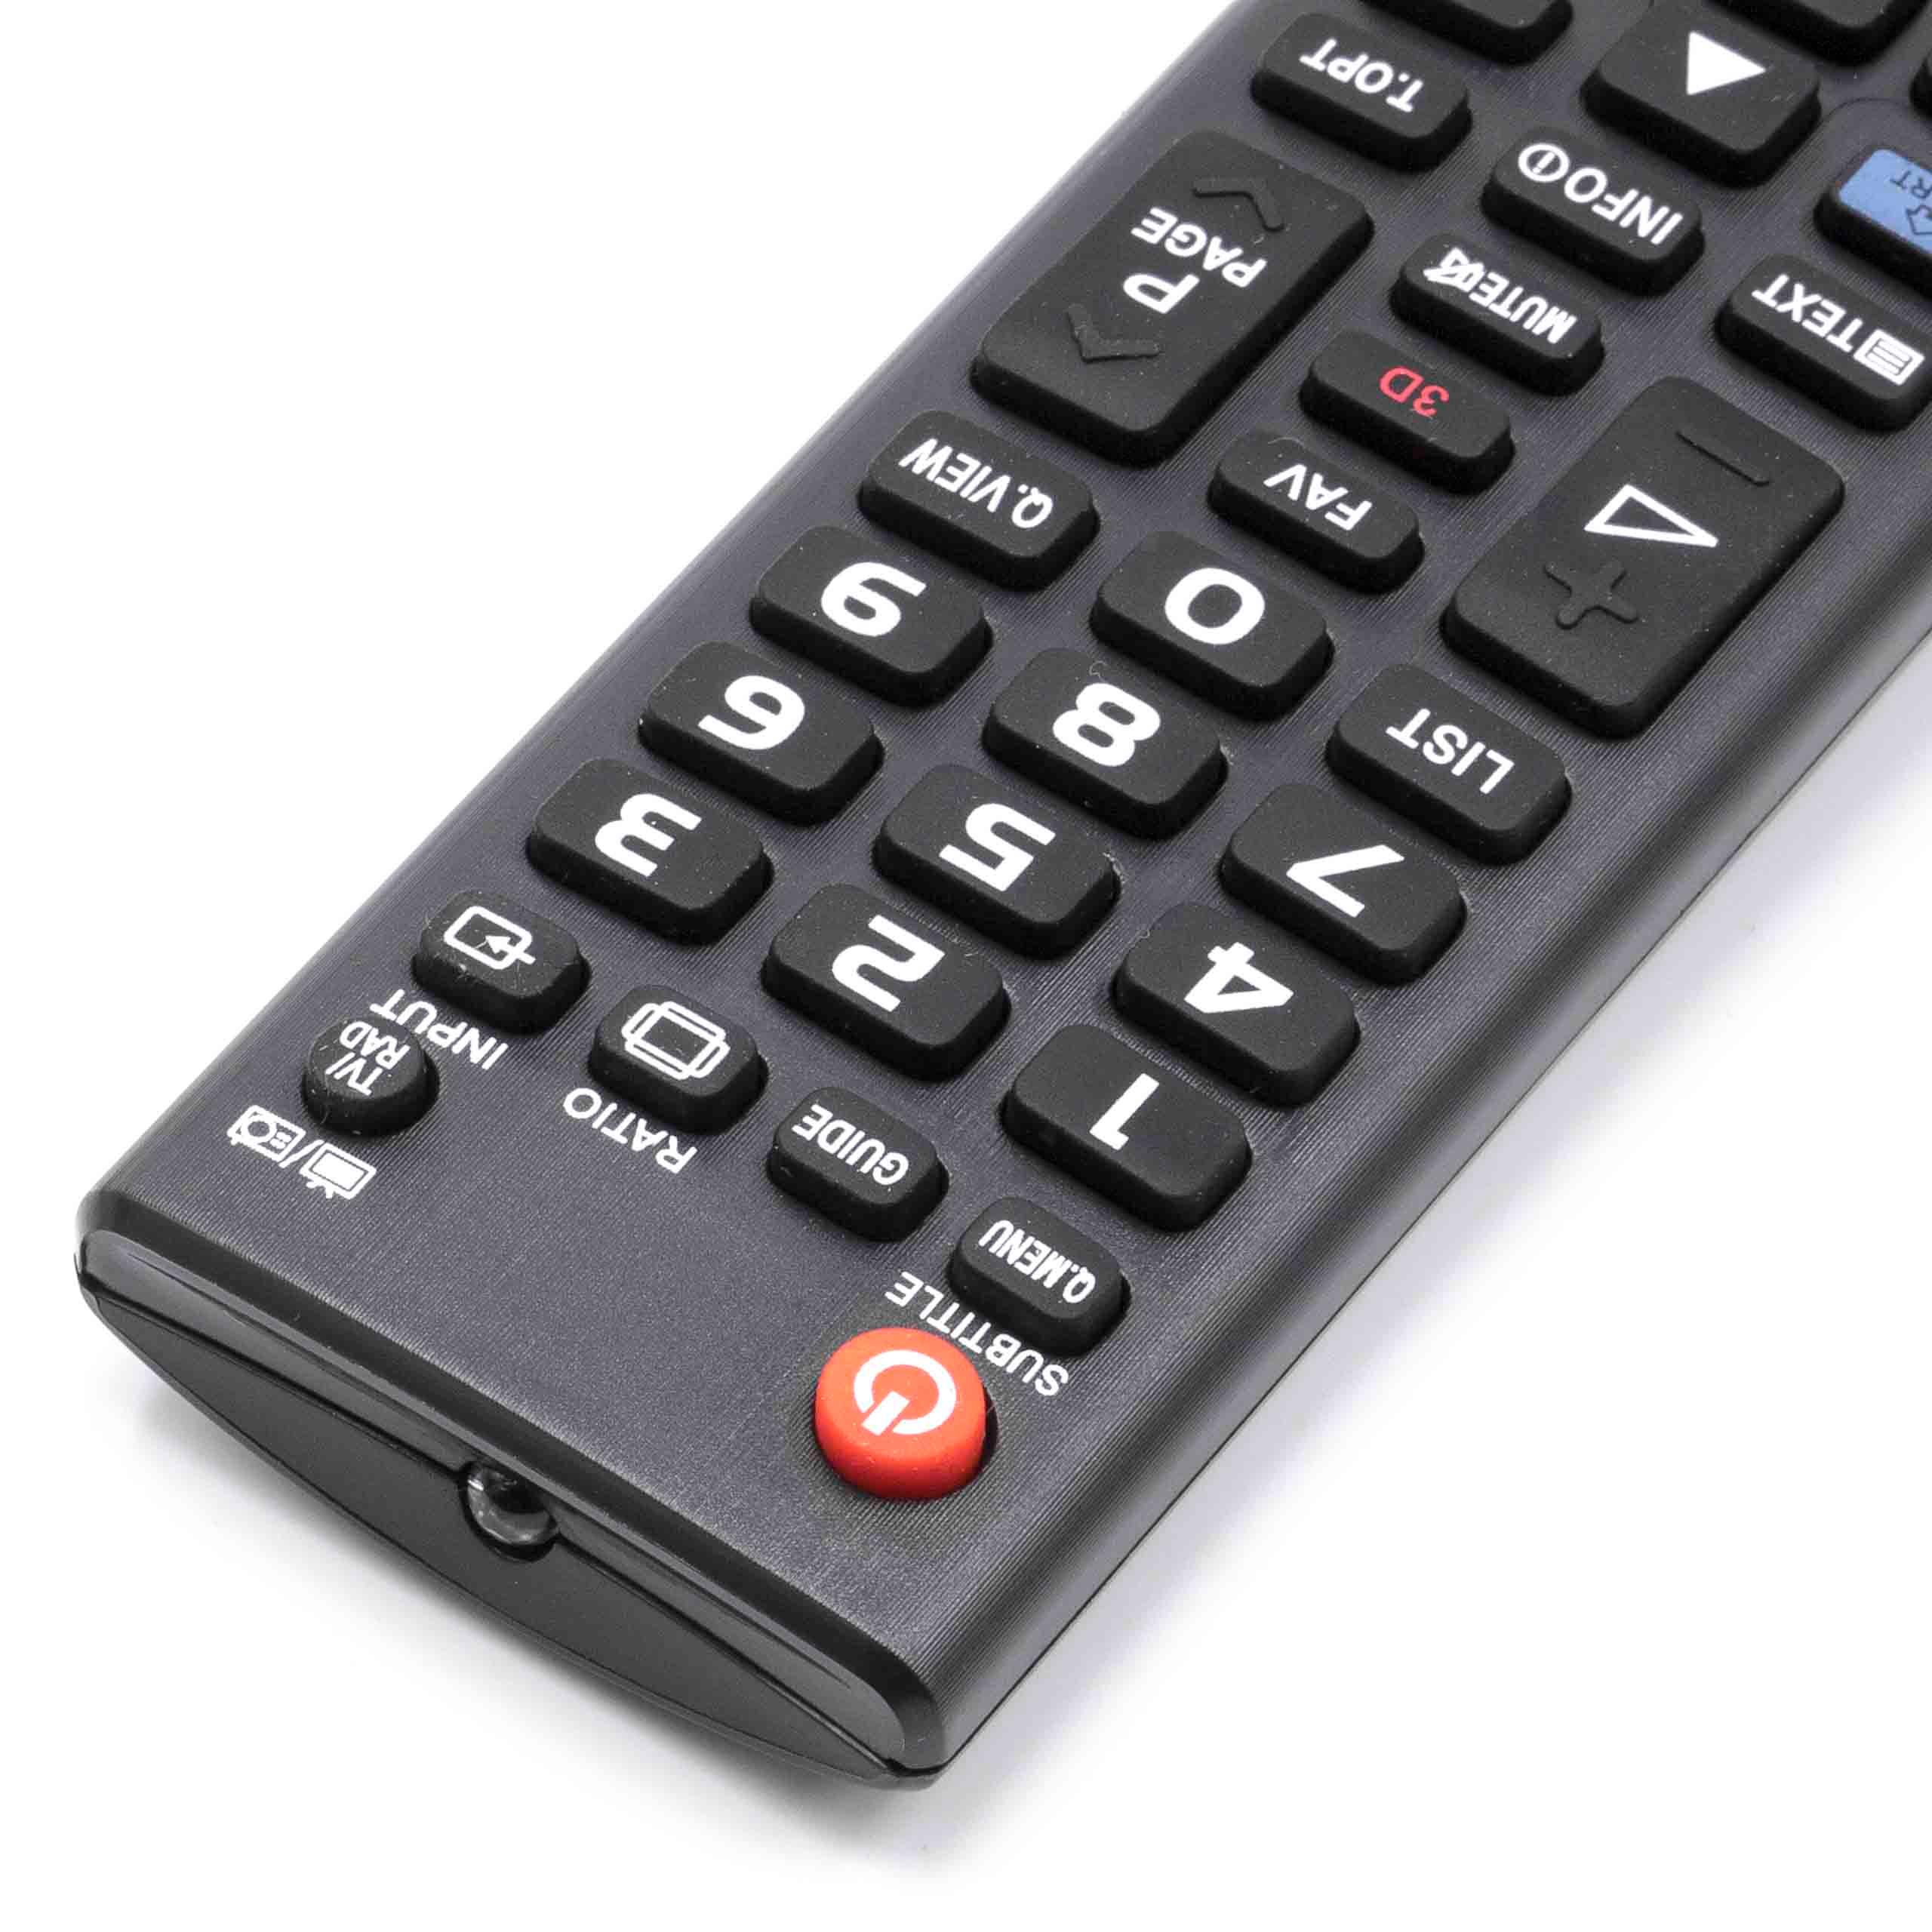 Remote Control replaces LG AKB73715606, AKB73715601 for LG TV